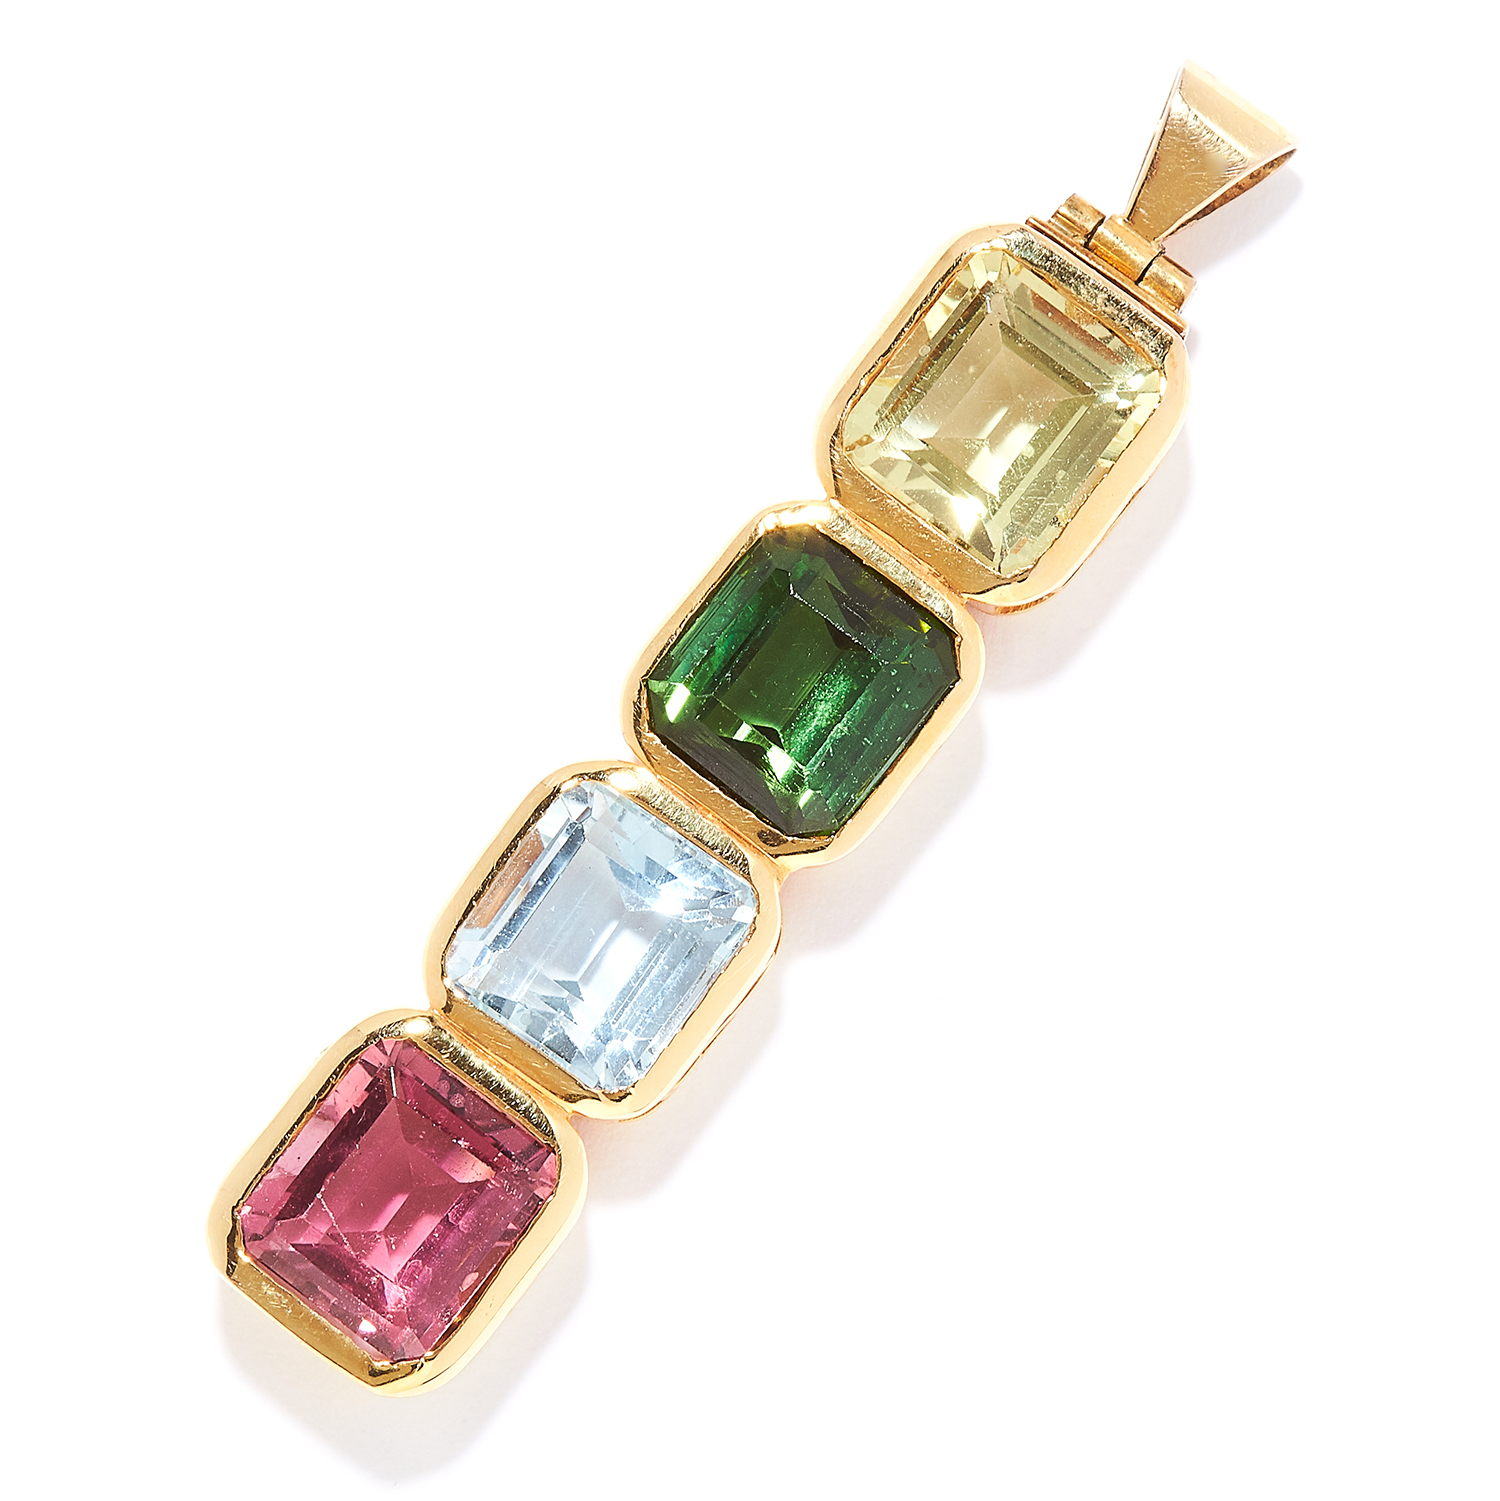 AQUAMARINE, HELIODOR AND TOURMALINE PENDANT in high carat yellow gold, set with a row of emerald cut